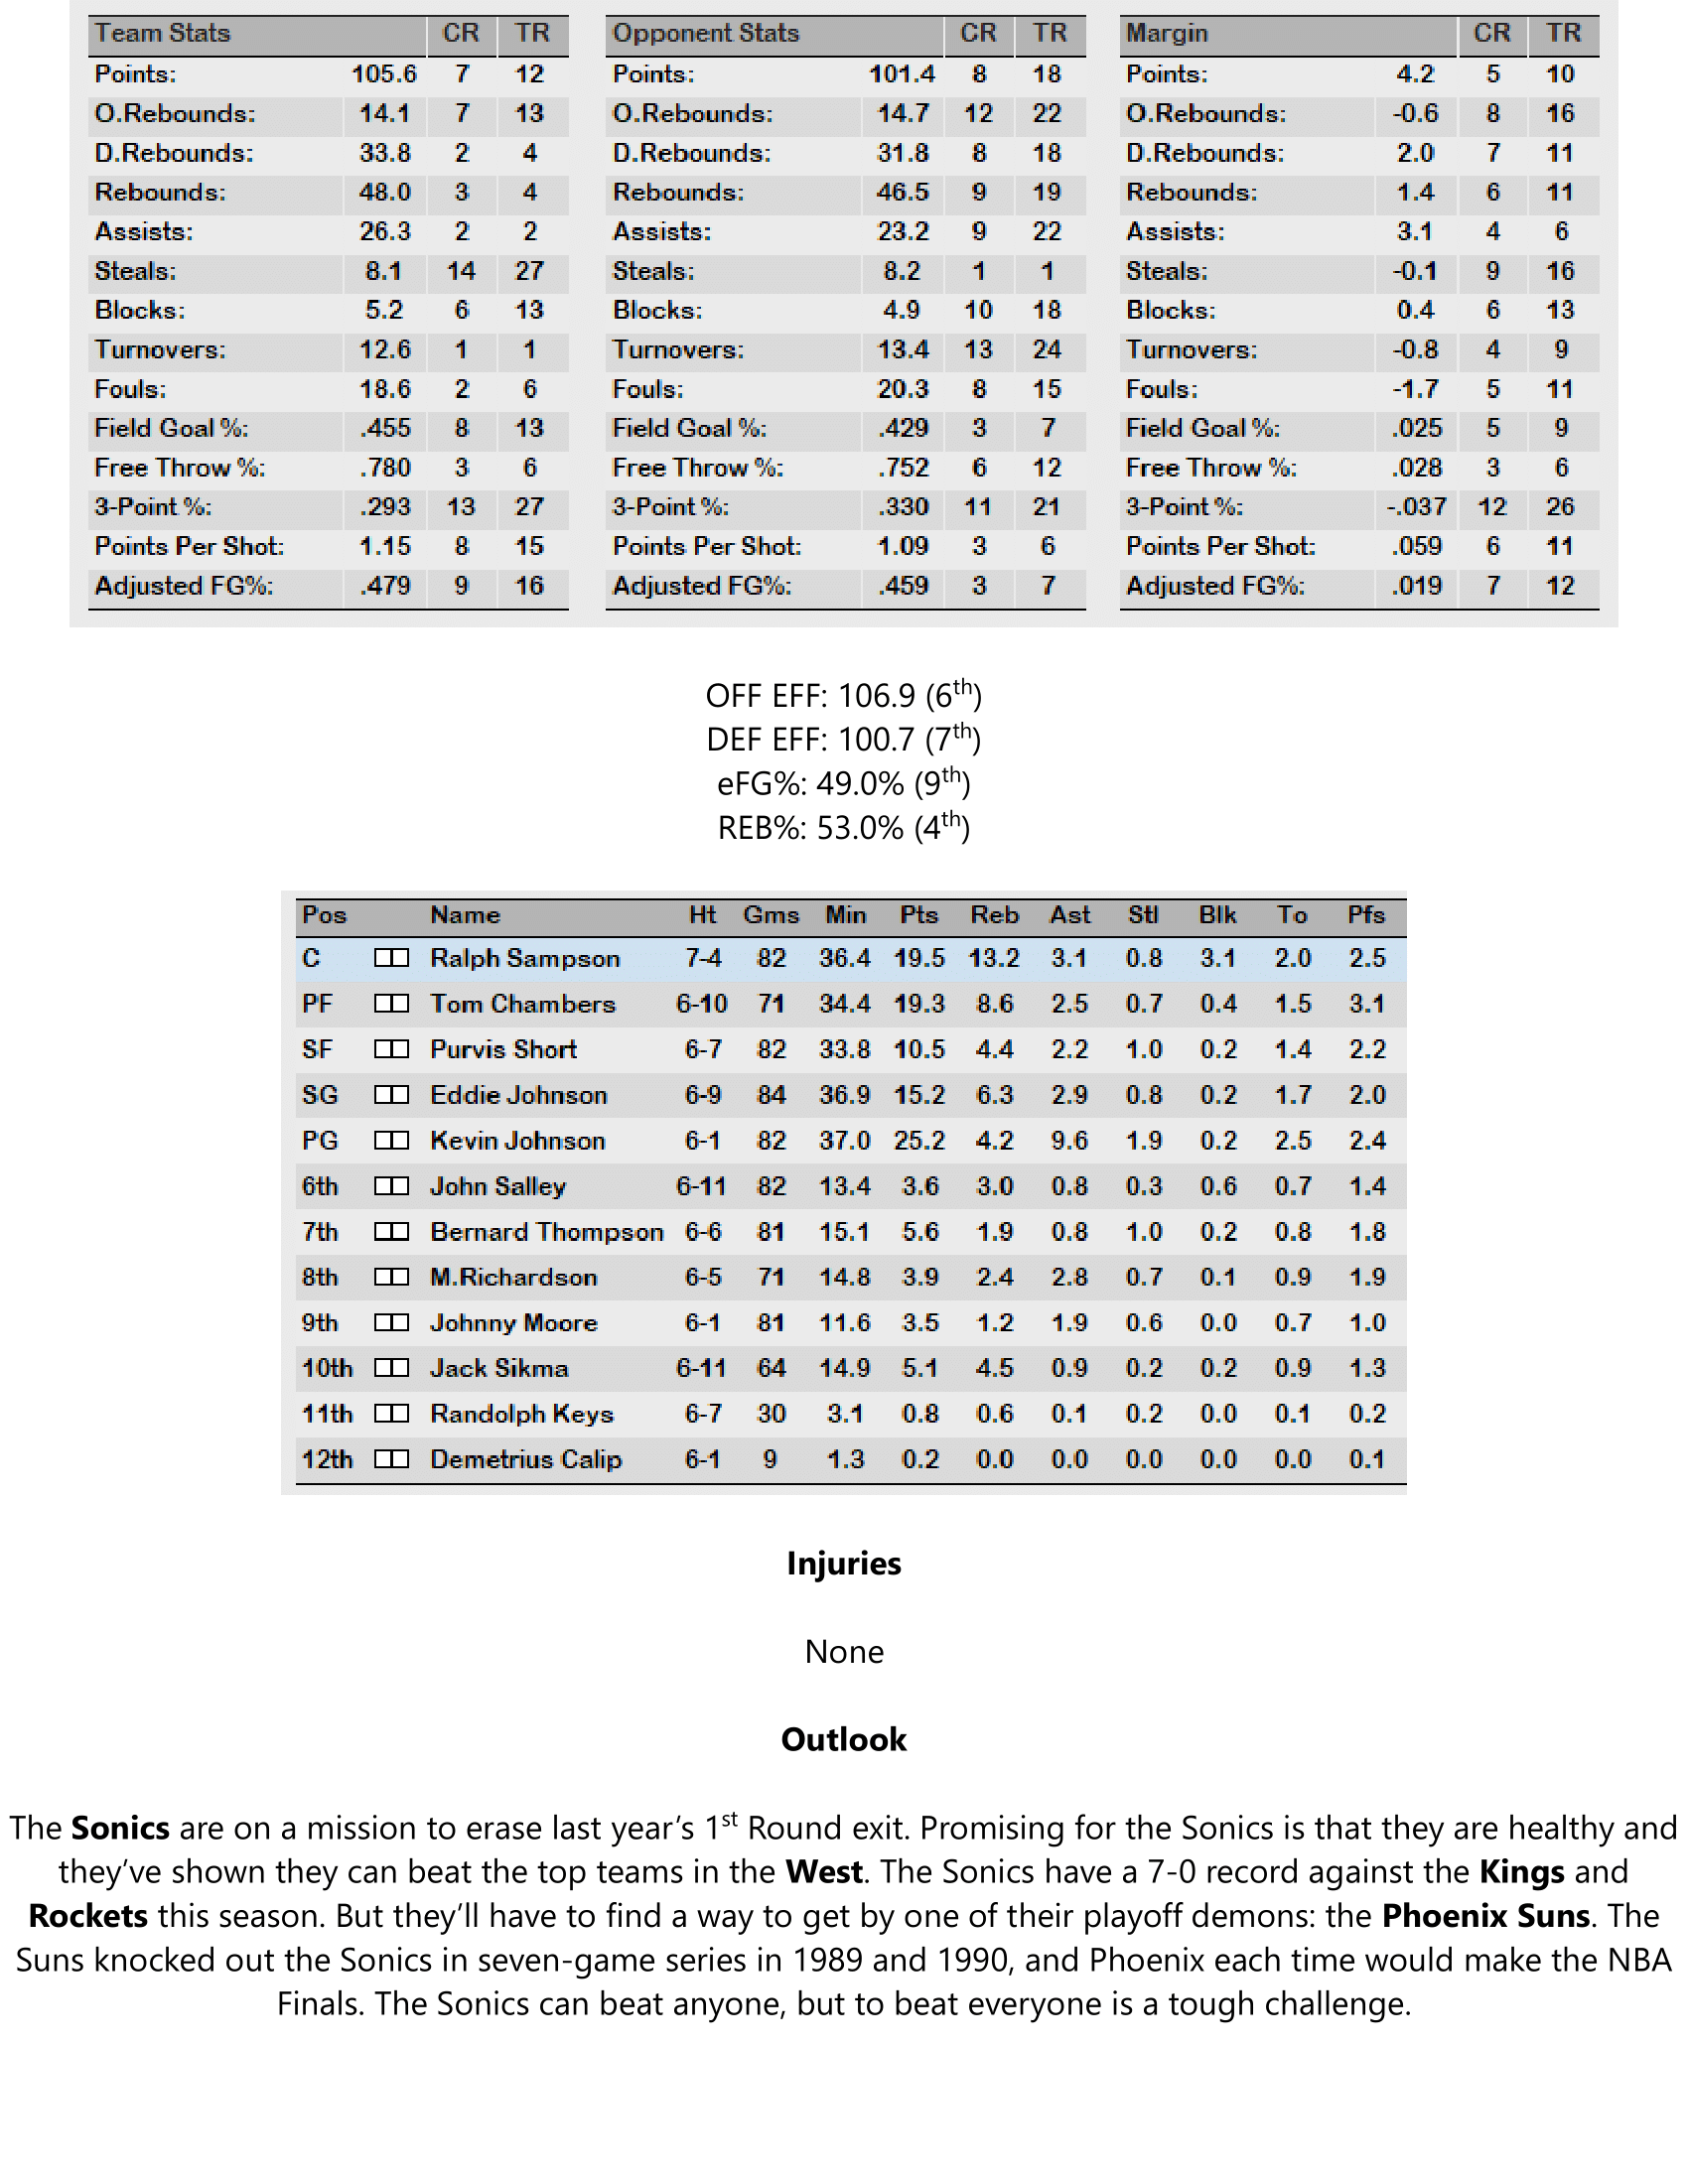 91-92-Part-4-Playoff-Preview-08.png